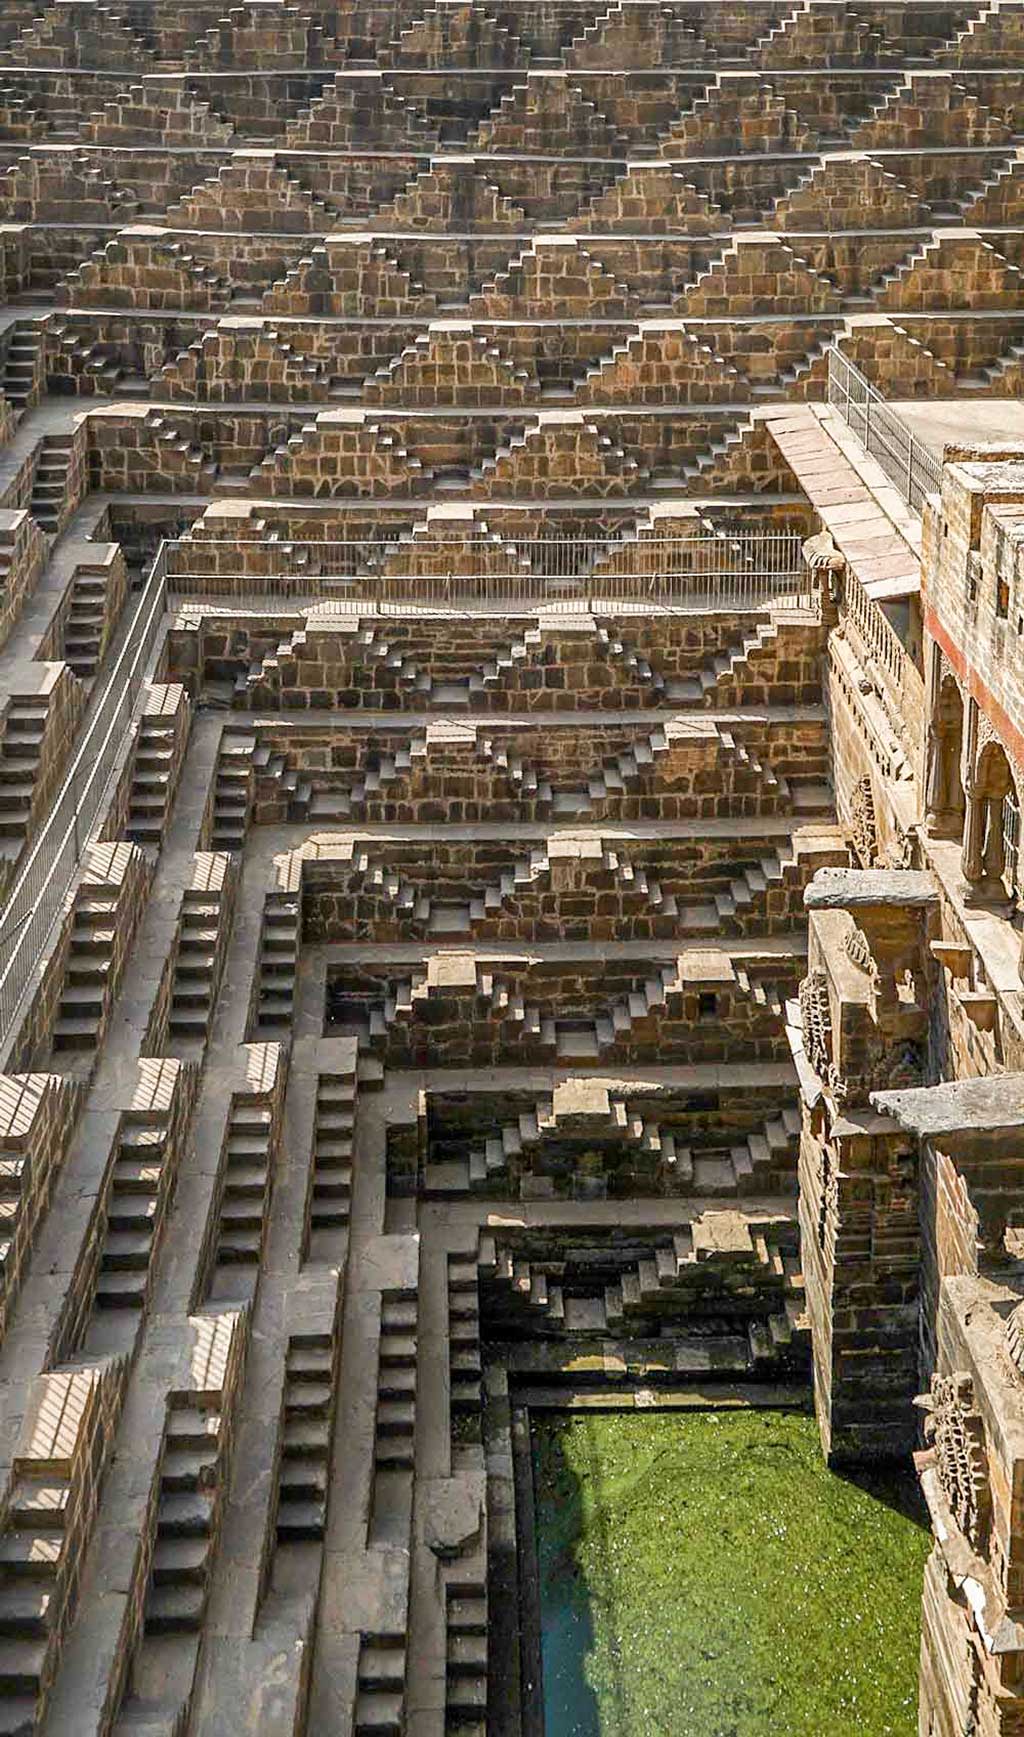 The 13 levels of steps at Chand Baori, Abhaneri